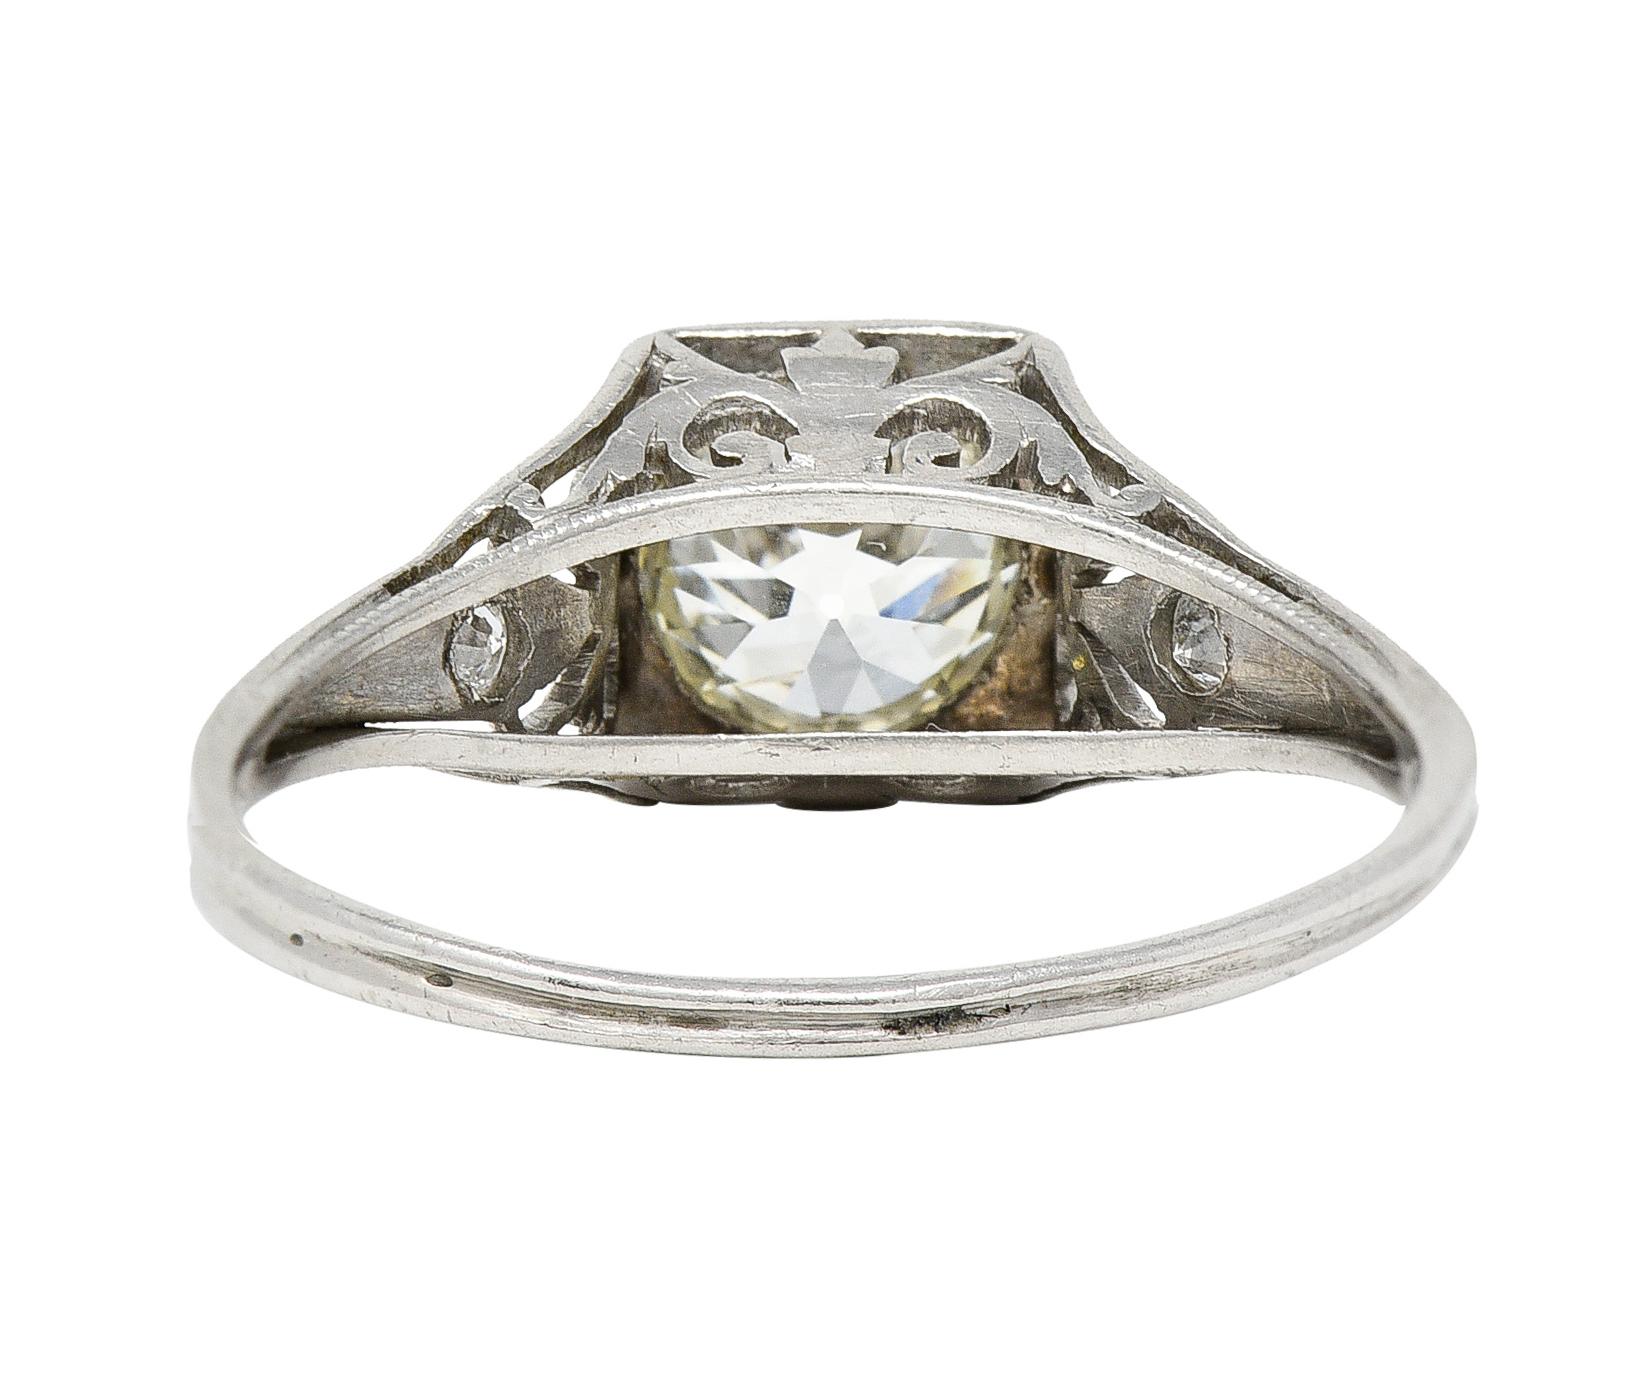 Traub Mfg. Art Deco 1.07 CTW Diamond Platinum Scrolling Vintage Engagement Ring In Excellent Condition For Sale In Philadelphia, PA